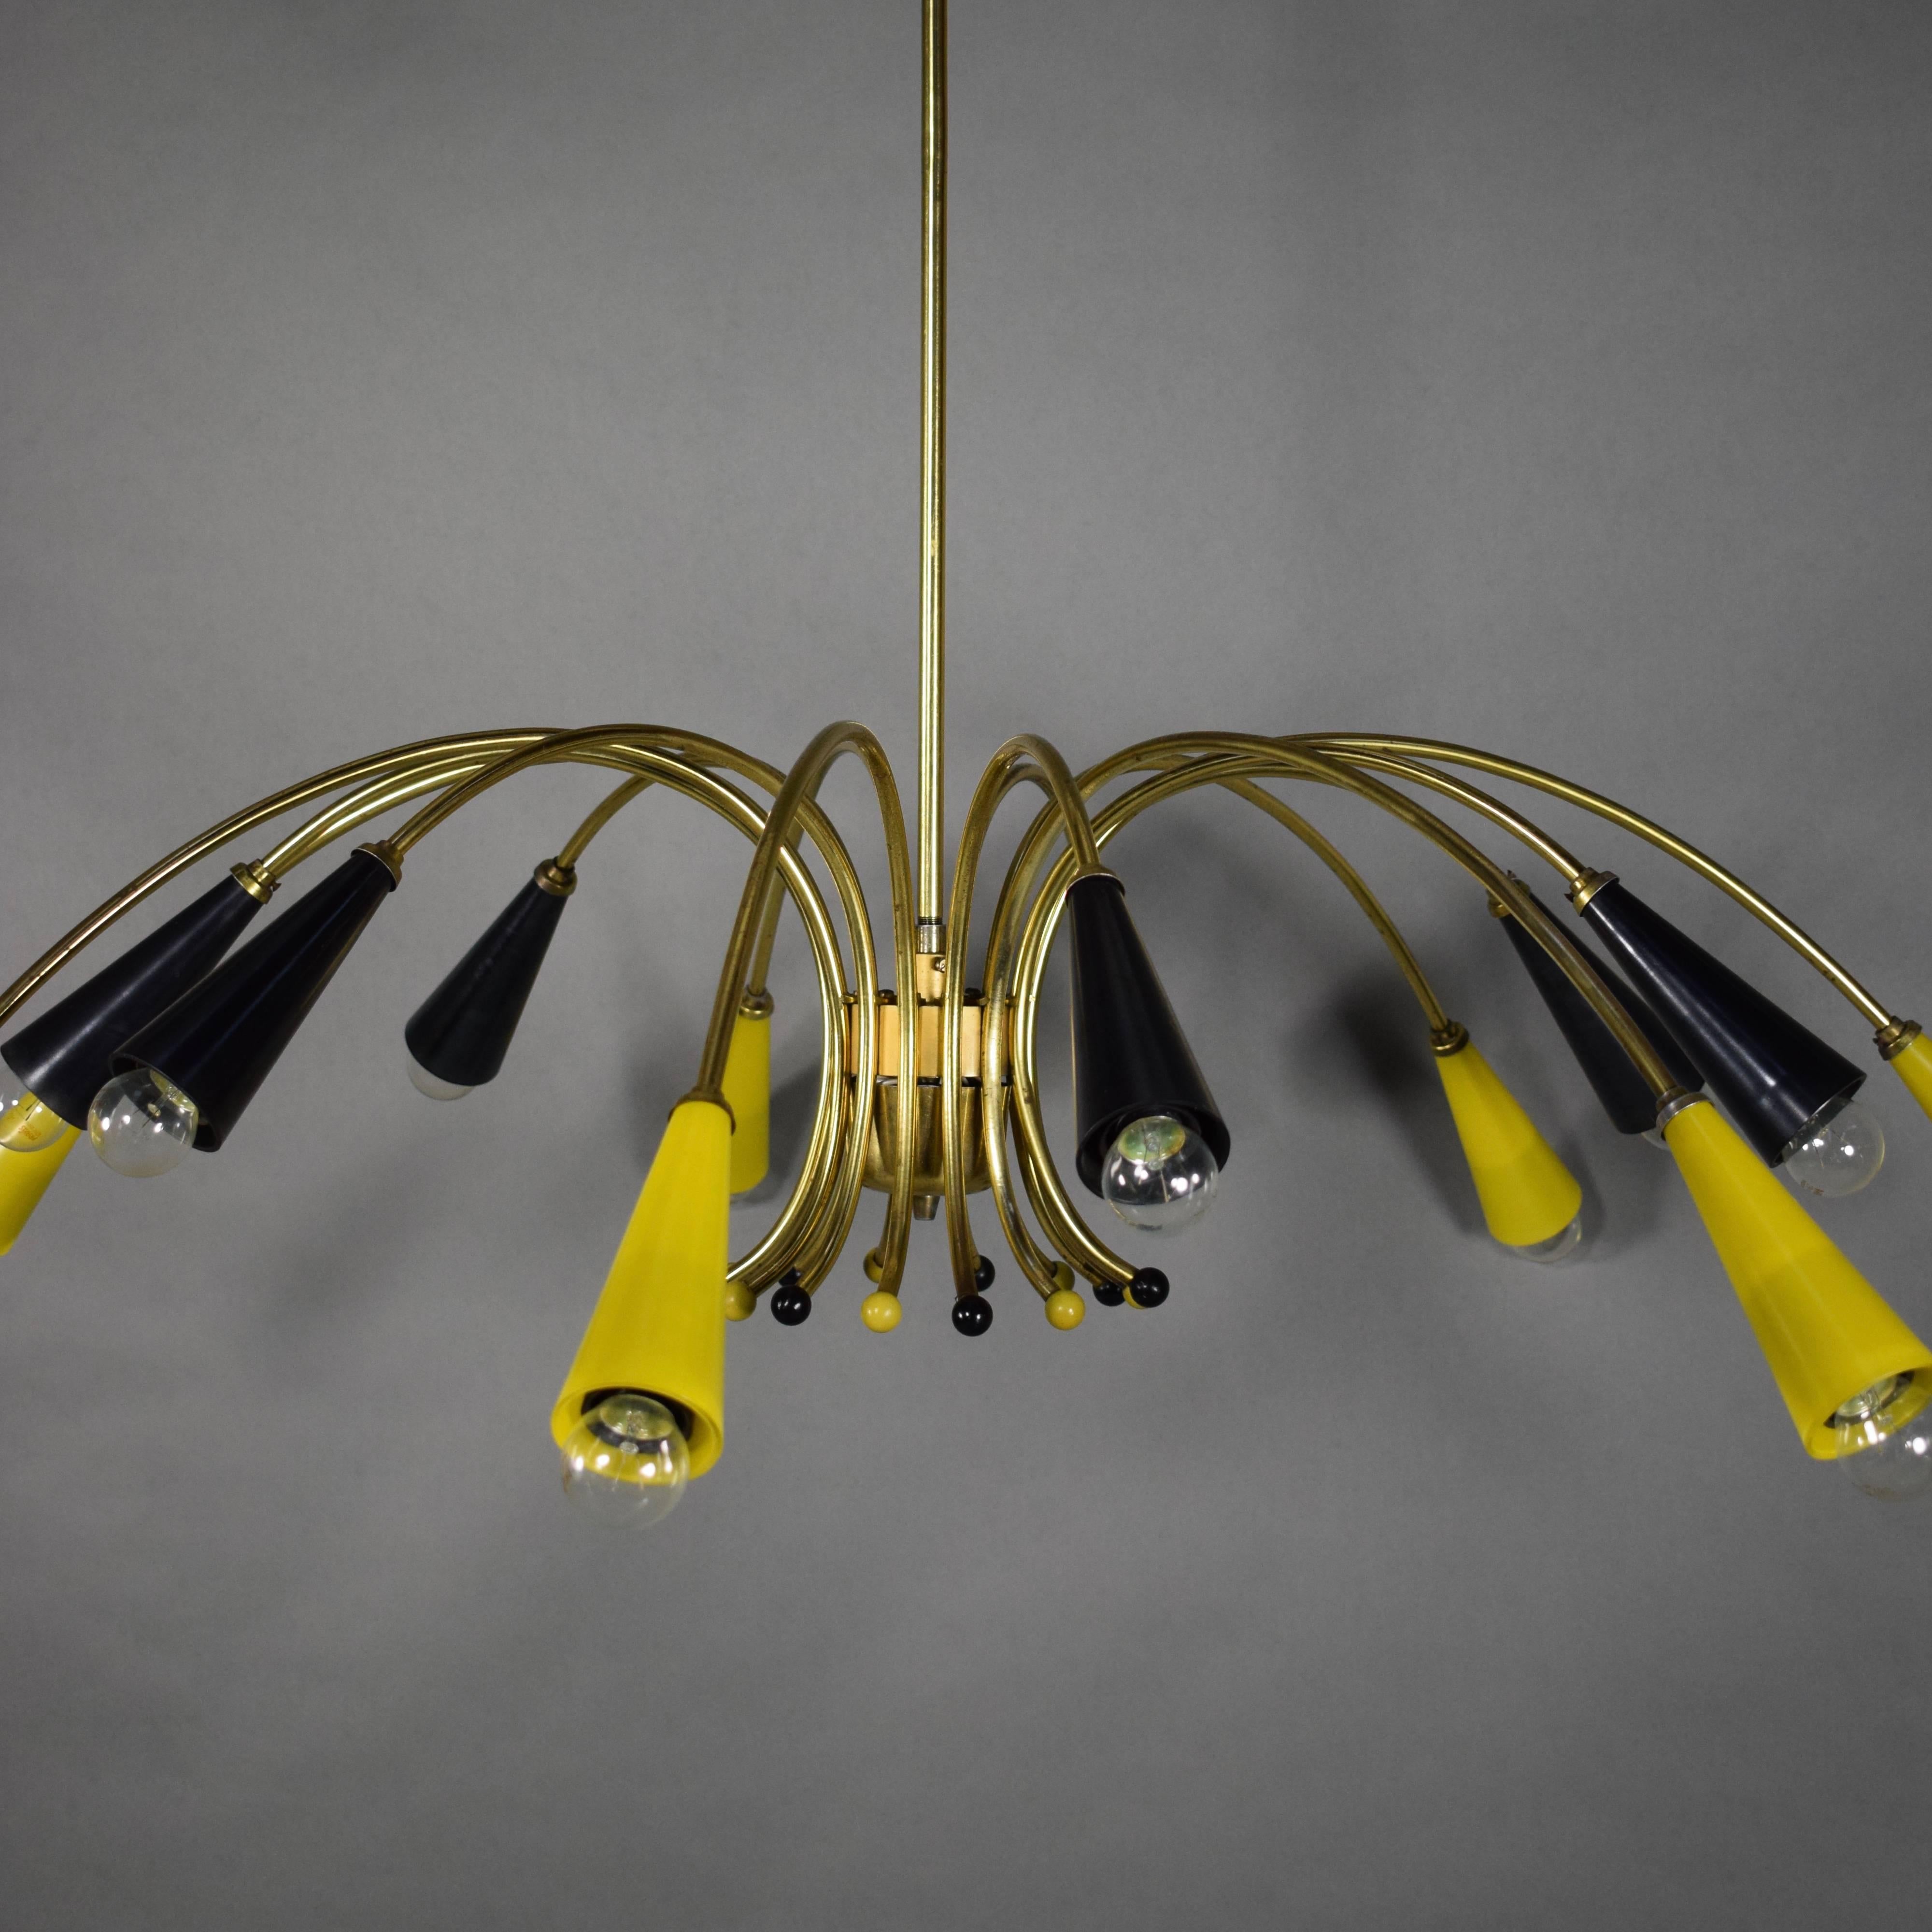 European Large Spider Chandelier in Brass and Colored Glass, 1950s